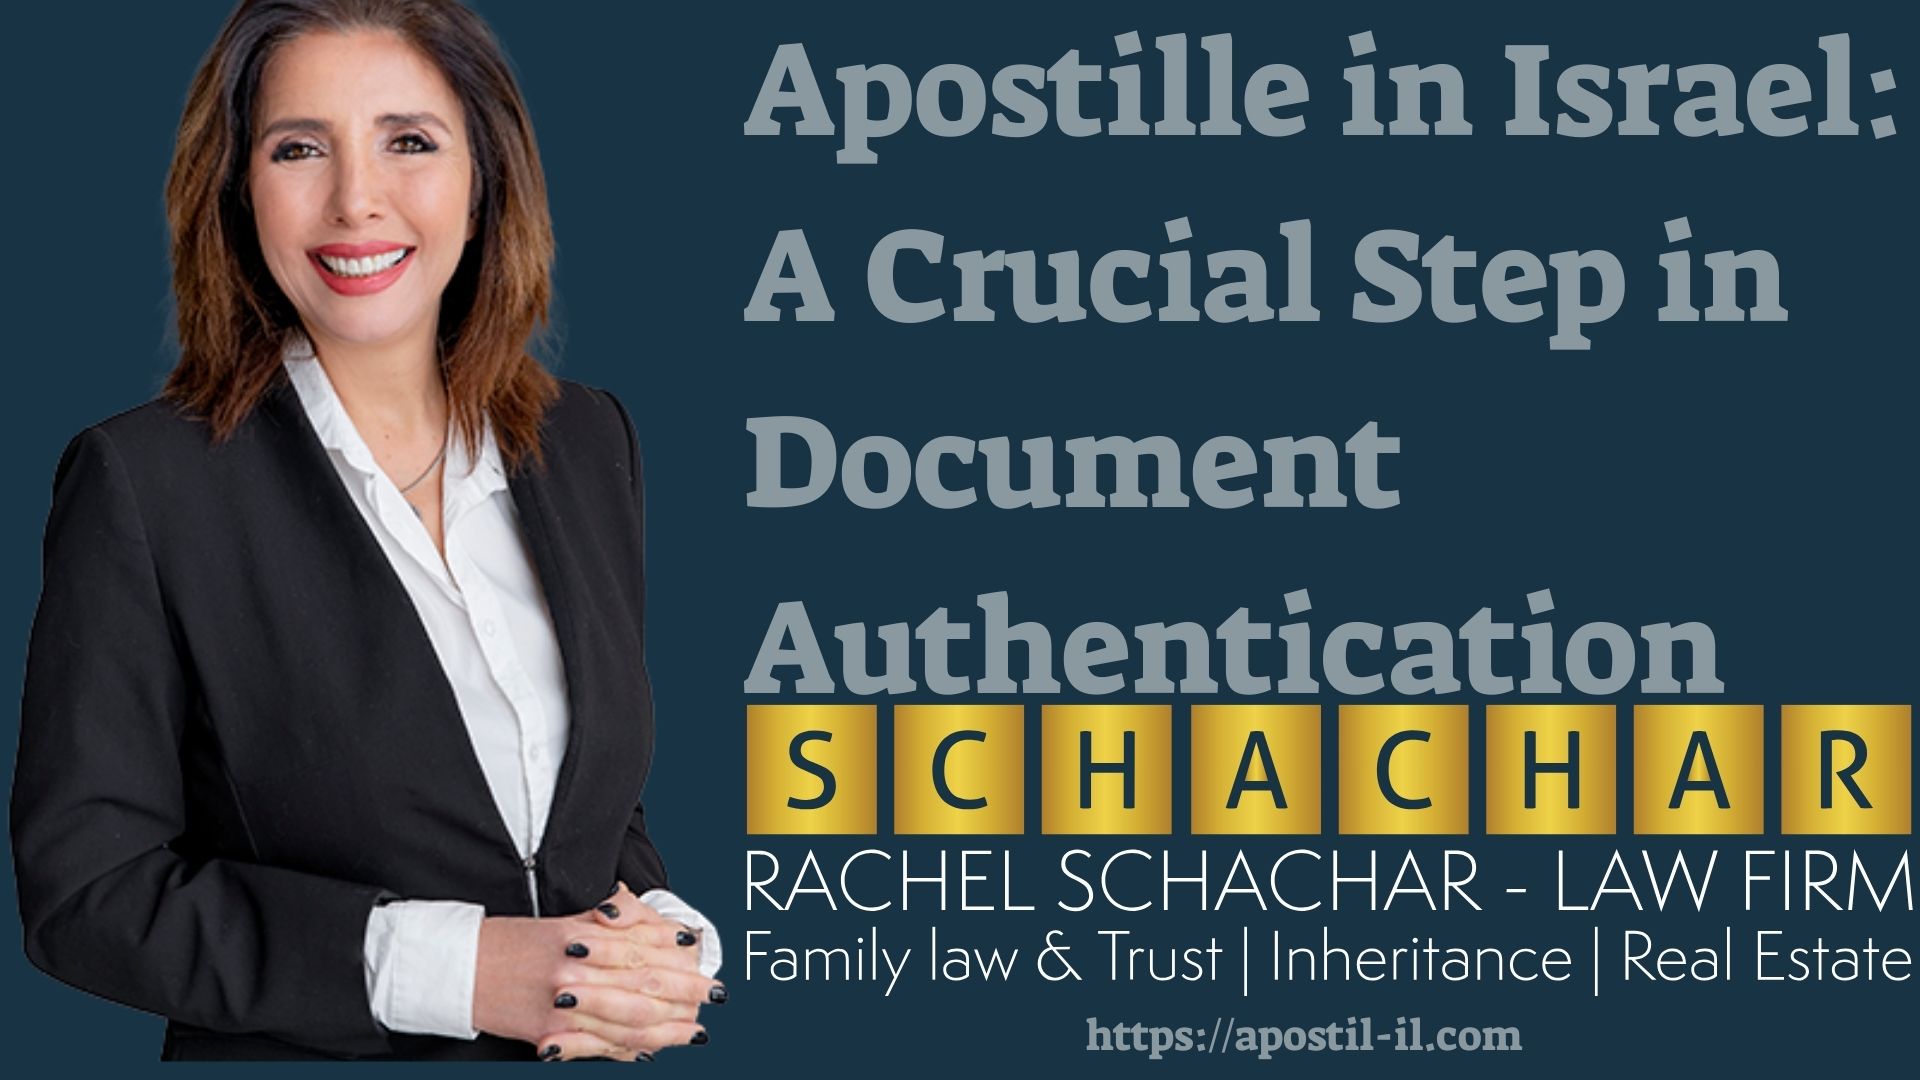 Apostille in Israel A Crucial Step in Document Authentication1